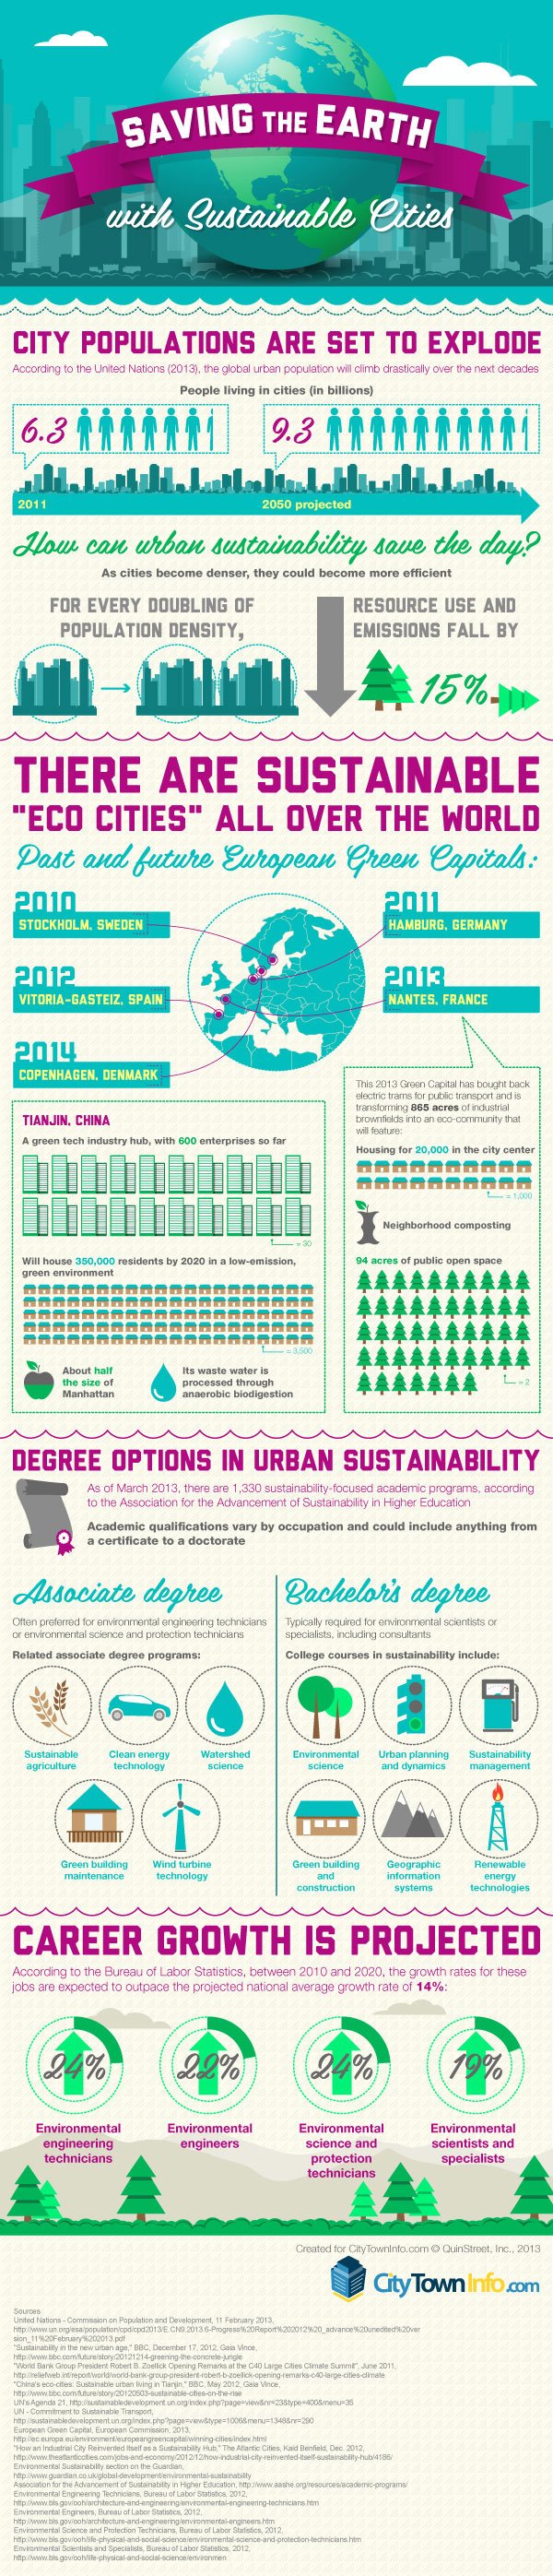 Top Sustainable Cities in the World